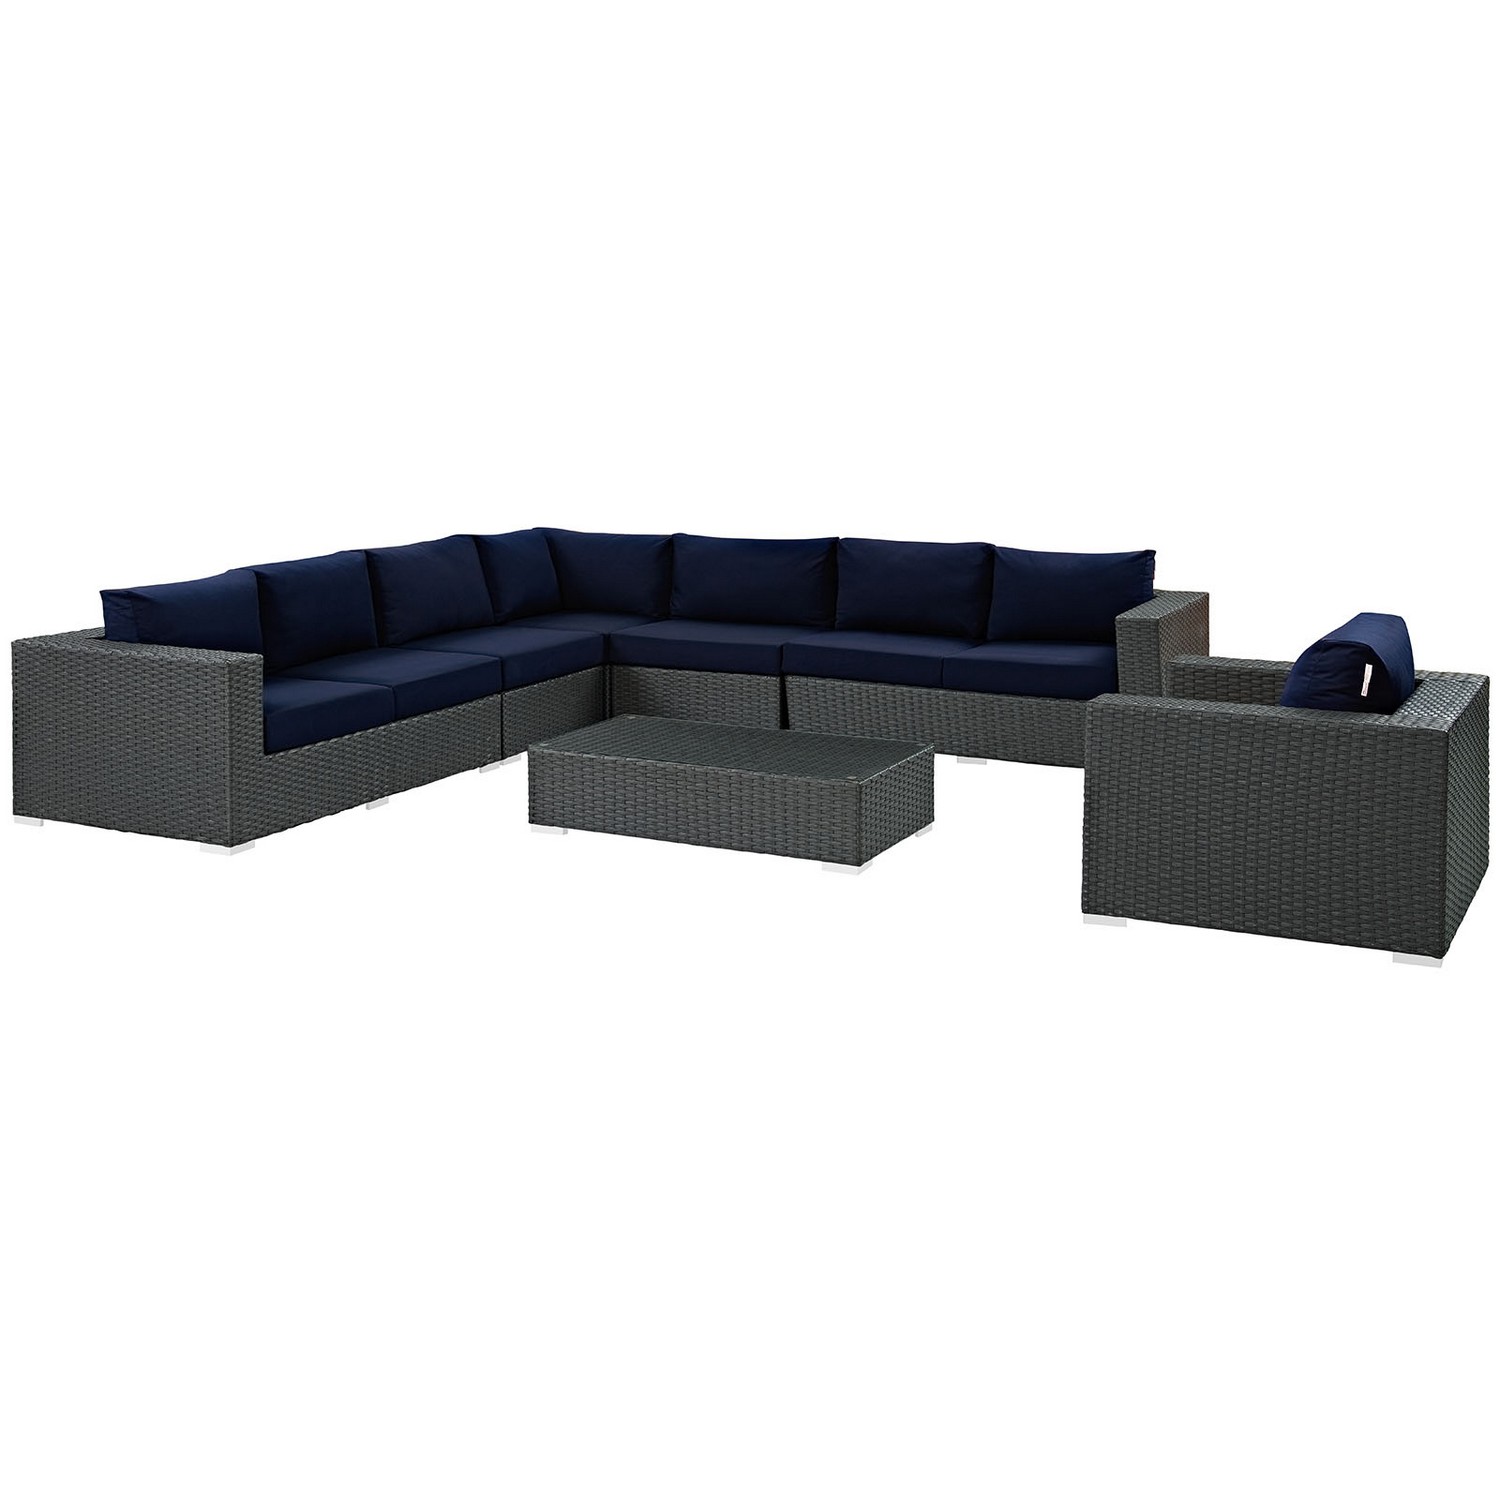 Modway Sojourn 7 Piece Outdoor Patio Sunbrella Sectional Set - Chocolate Navy